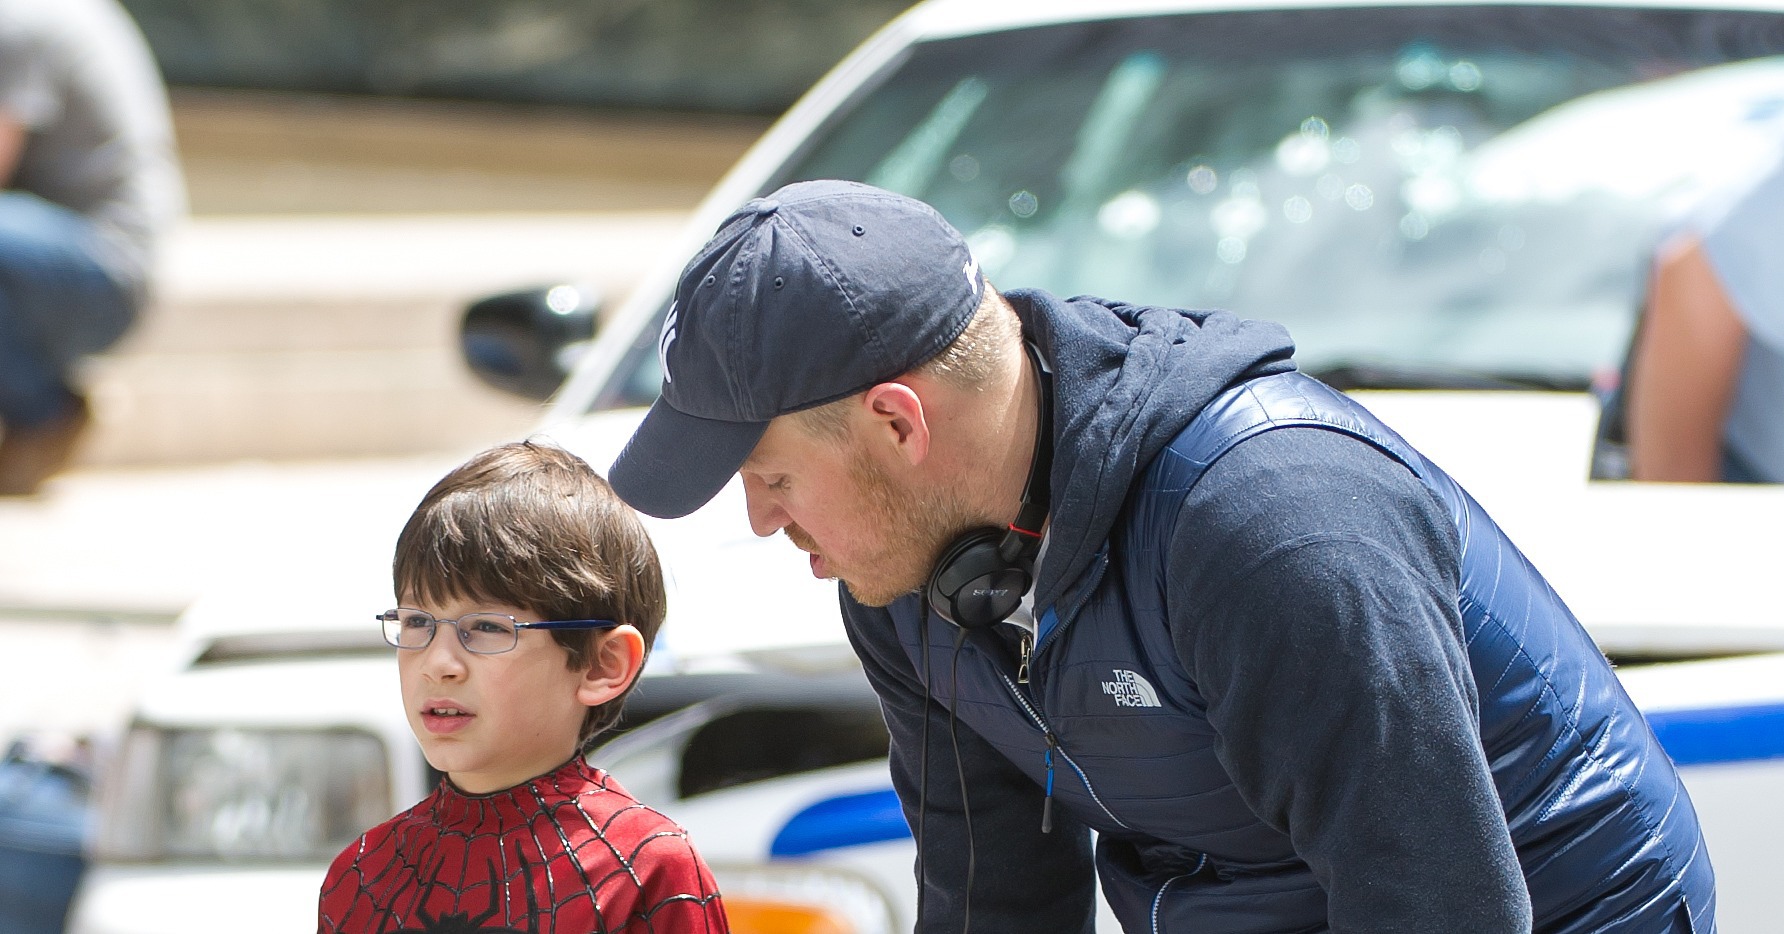 Jorge Vega and Director, Marc Webb on the set of The Amazing Spider-Man 2